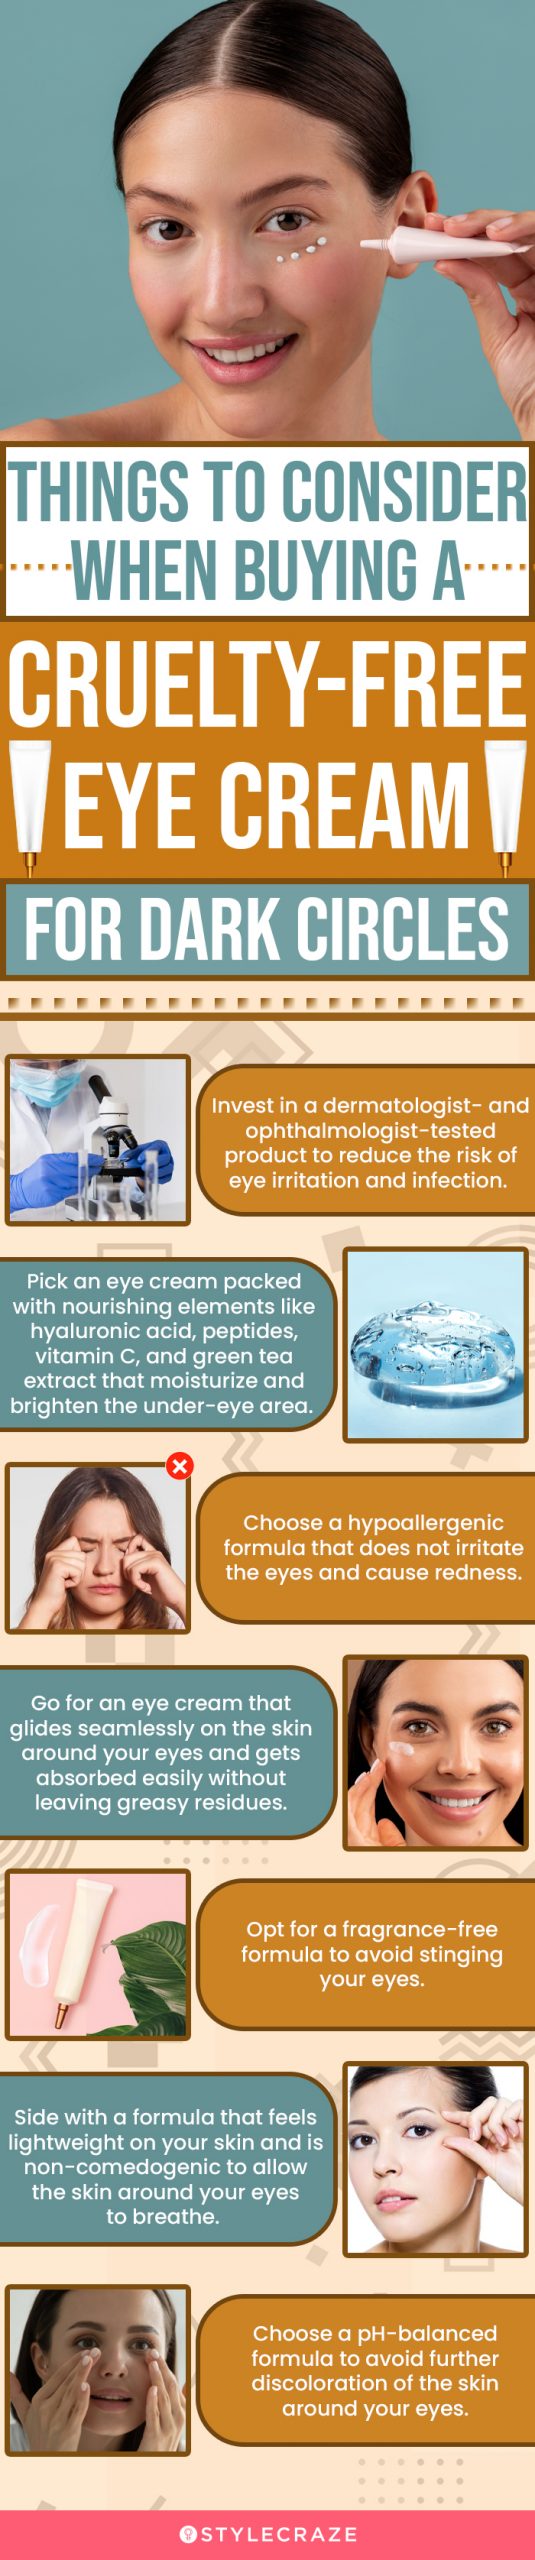 Things To Consider When Buying A Cruelty-Free Eye Cream (infographic)